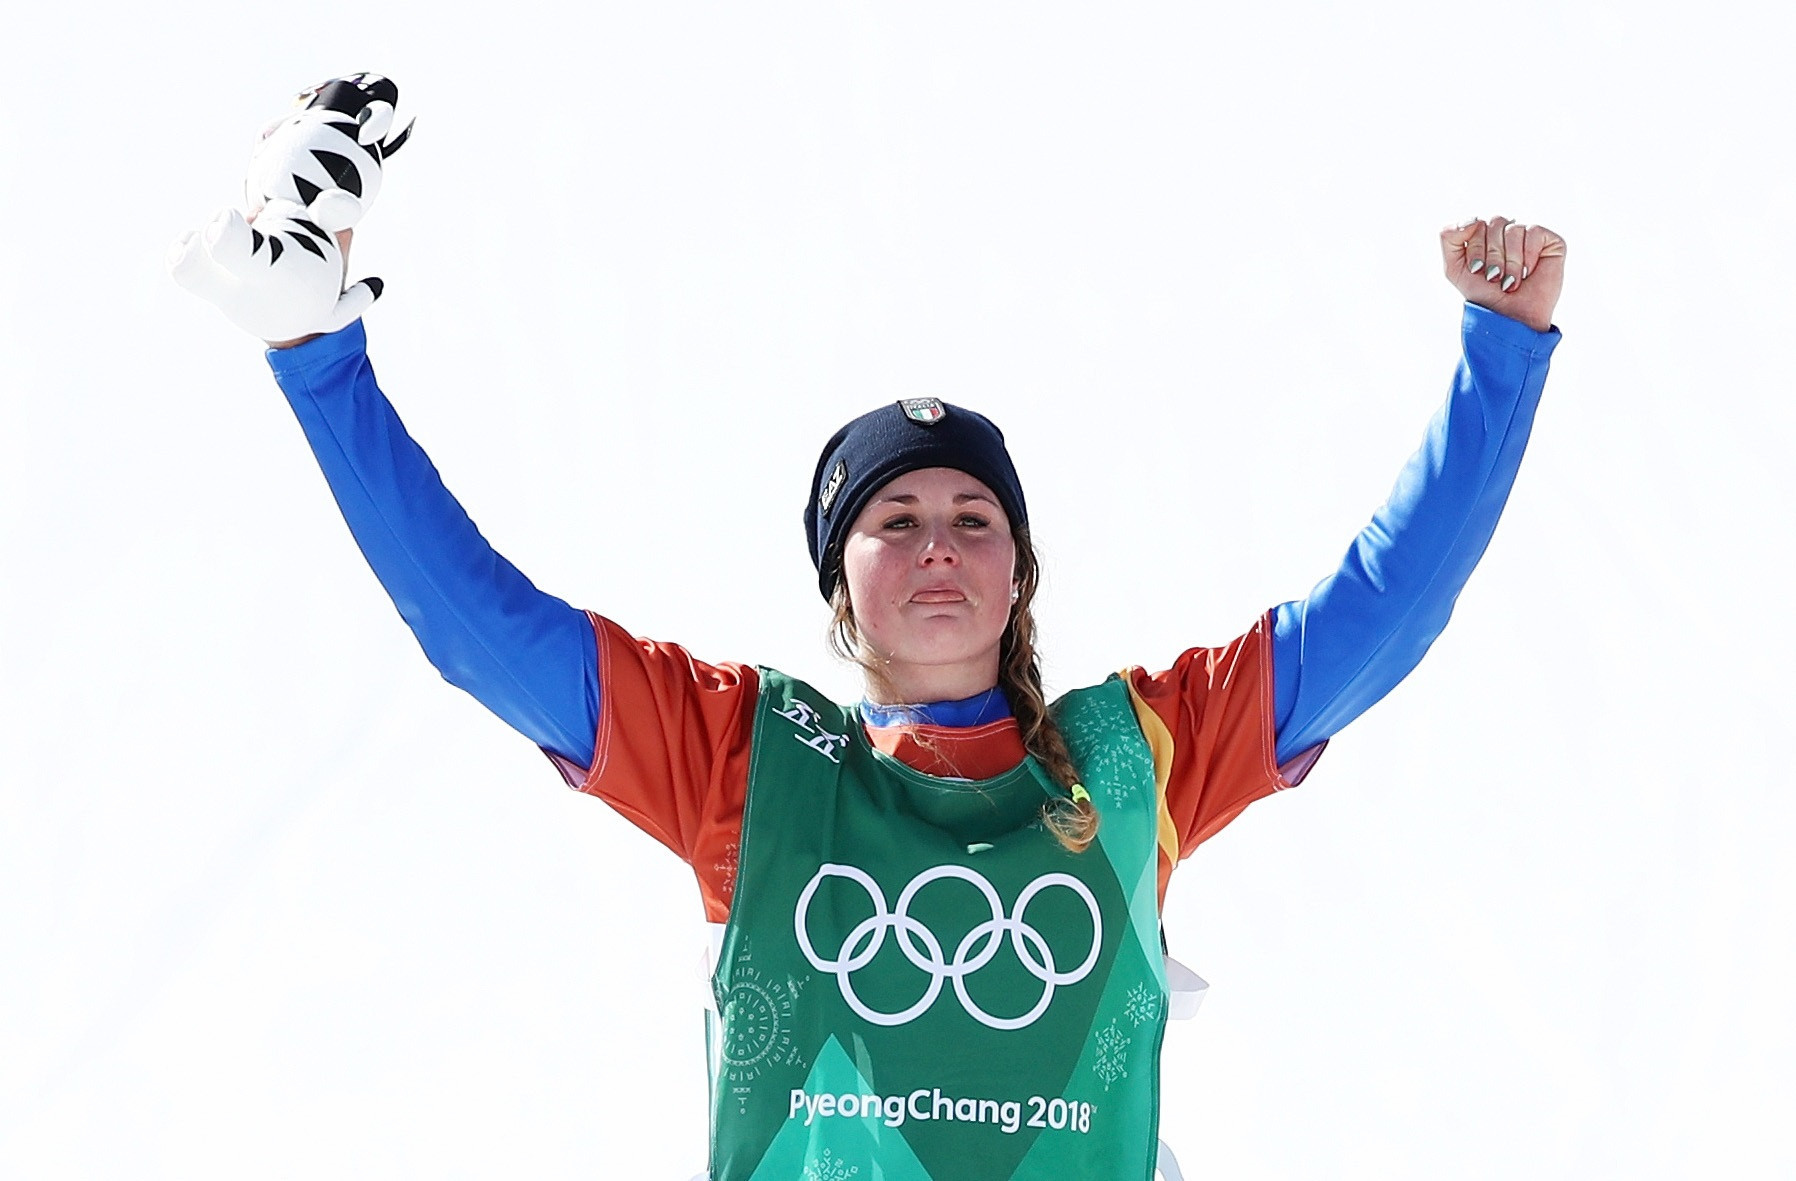 Italy’s Michela Moioli claimed her maiden Olympic title after winning the women’s snowboard cross event at Pyeongchang 2018 today ©Getty Images